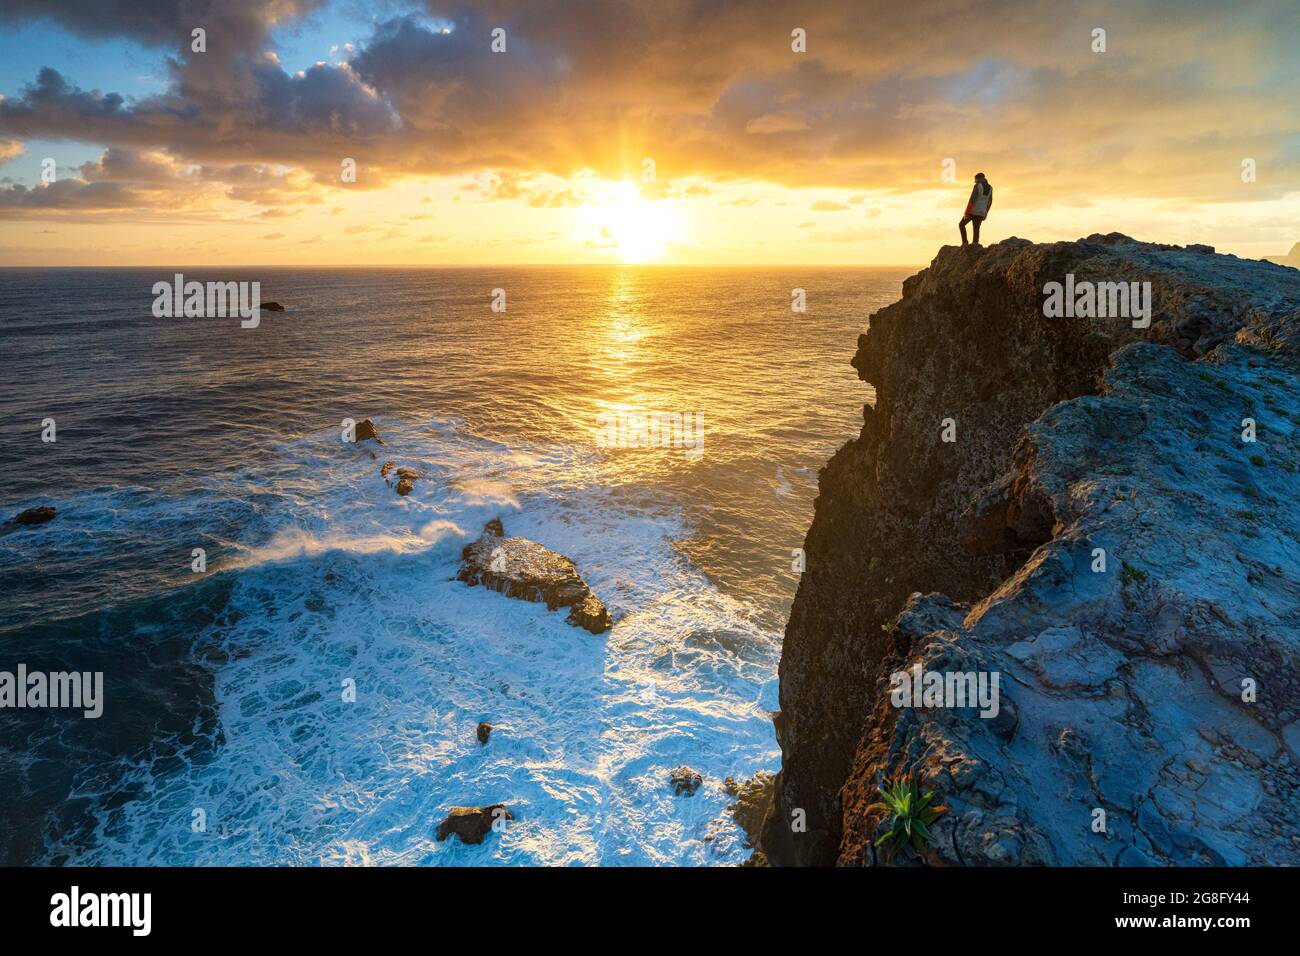 One man watching sunrise over the ocean waves from cliffs, Madeira island, Portugal, Atlantic, Europe Stock Photo